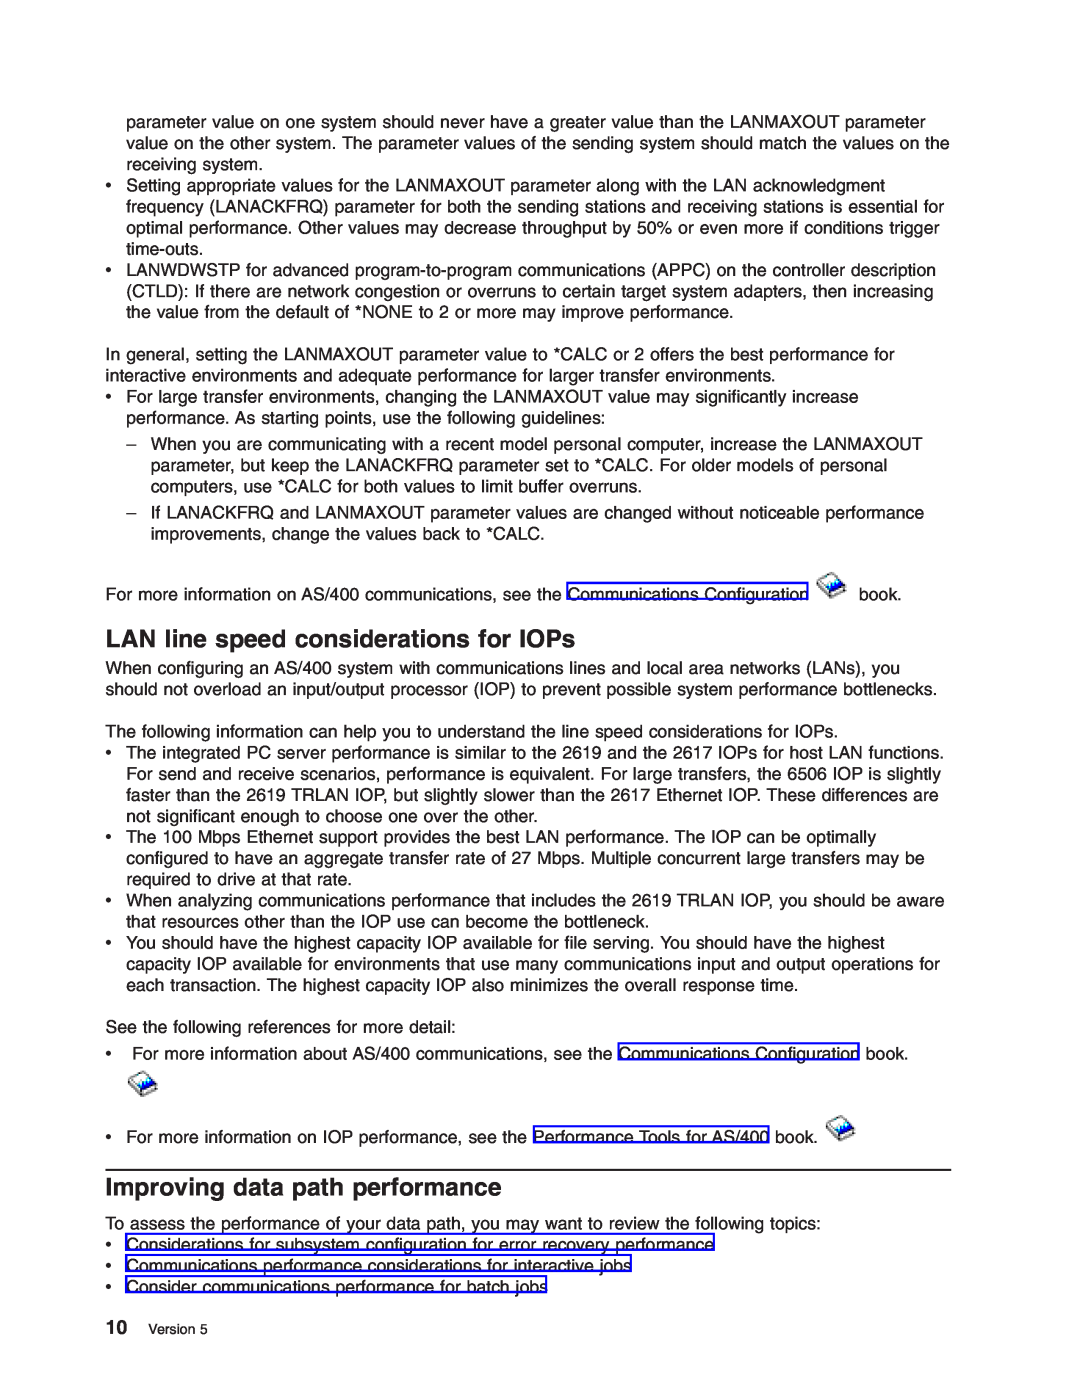 IBM AS/400 manual LAN line speed considerations for IOPs, Improving data path performance 